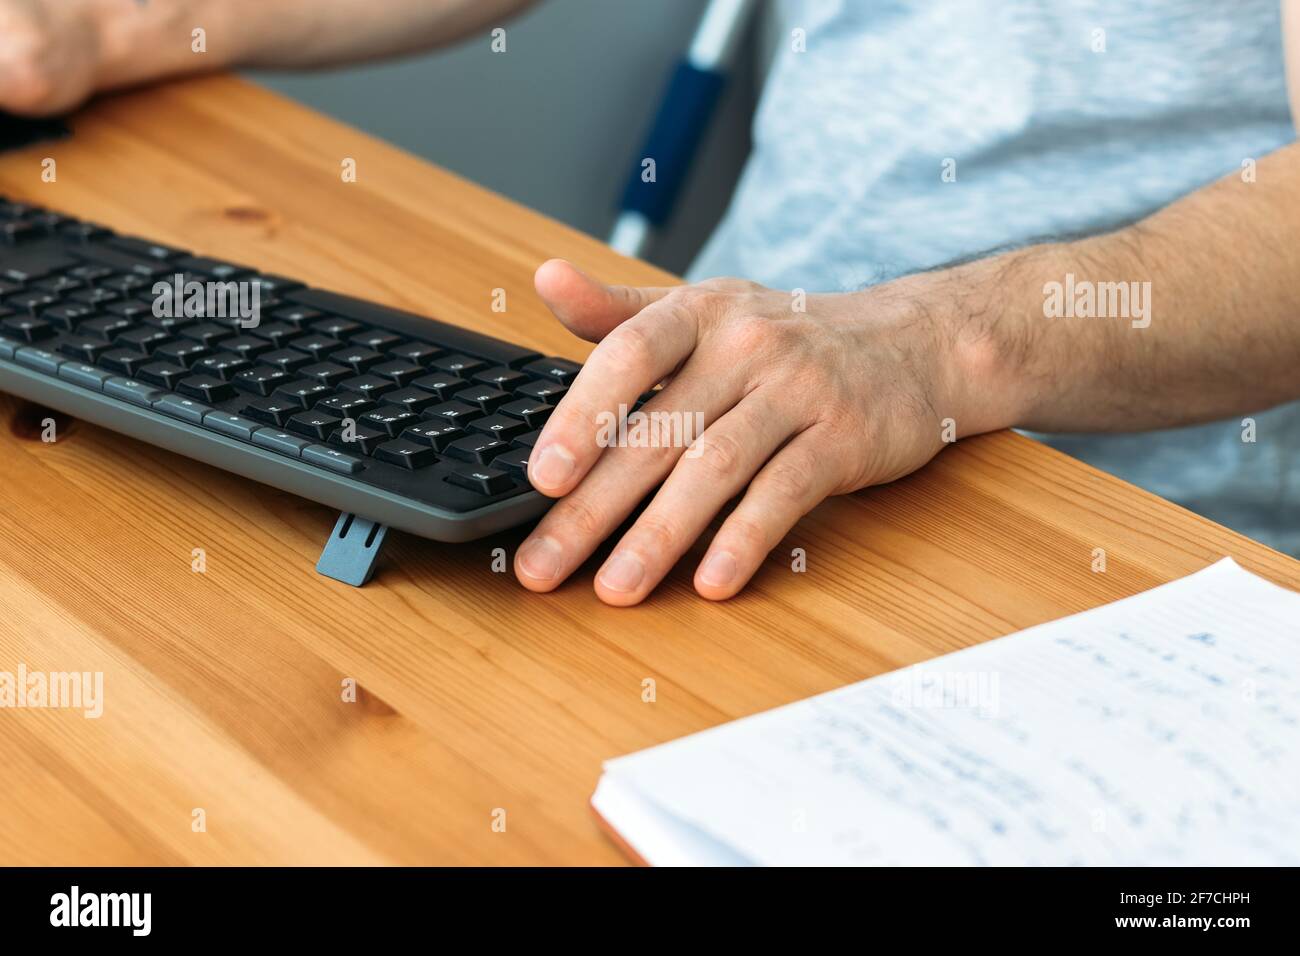 Wooden table with black wireless keyboard, male hands and a notebook. Selective focus Stock Photo